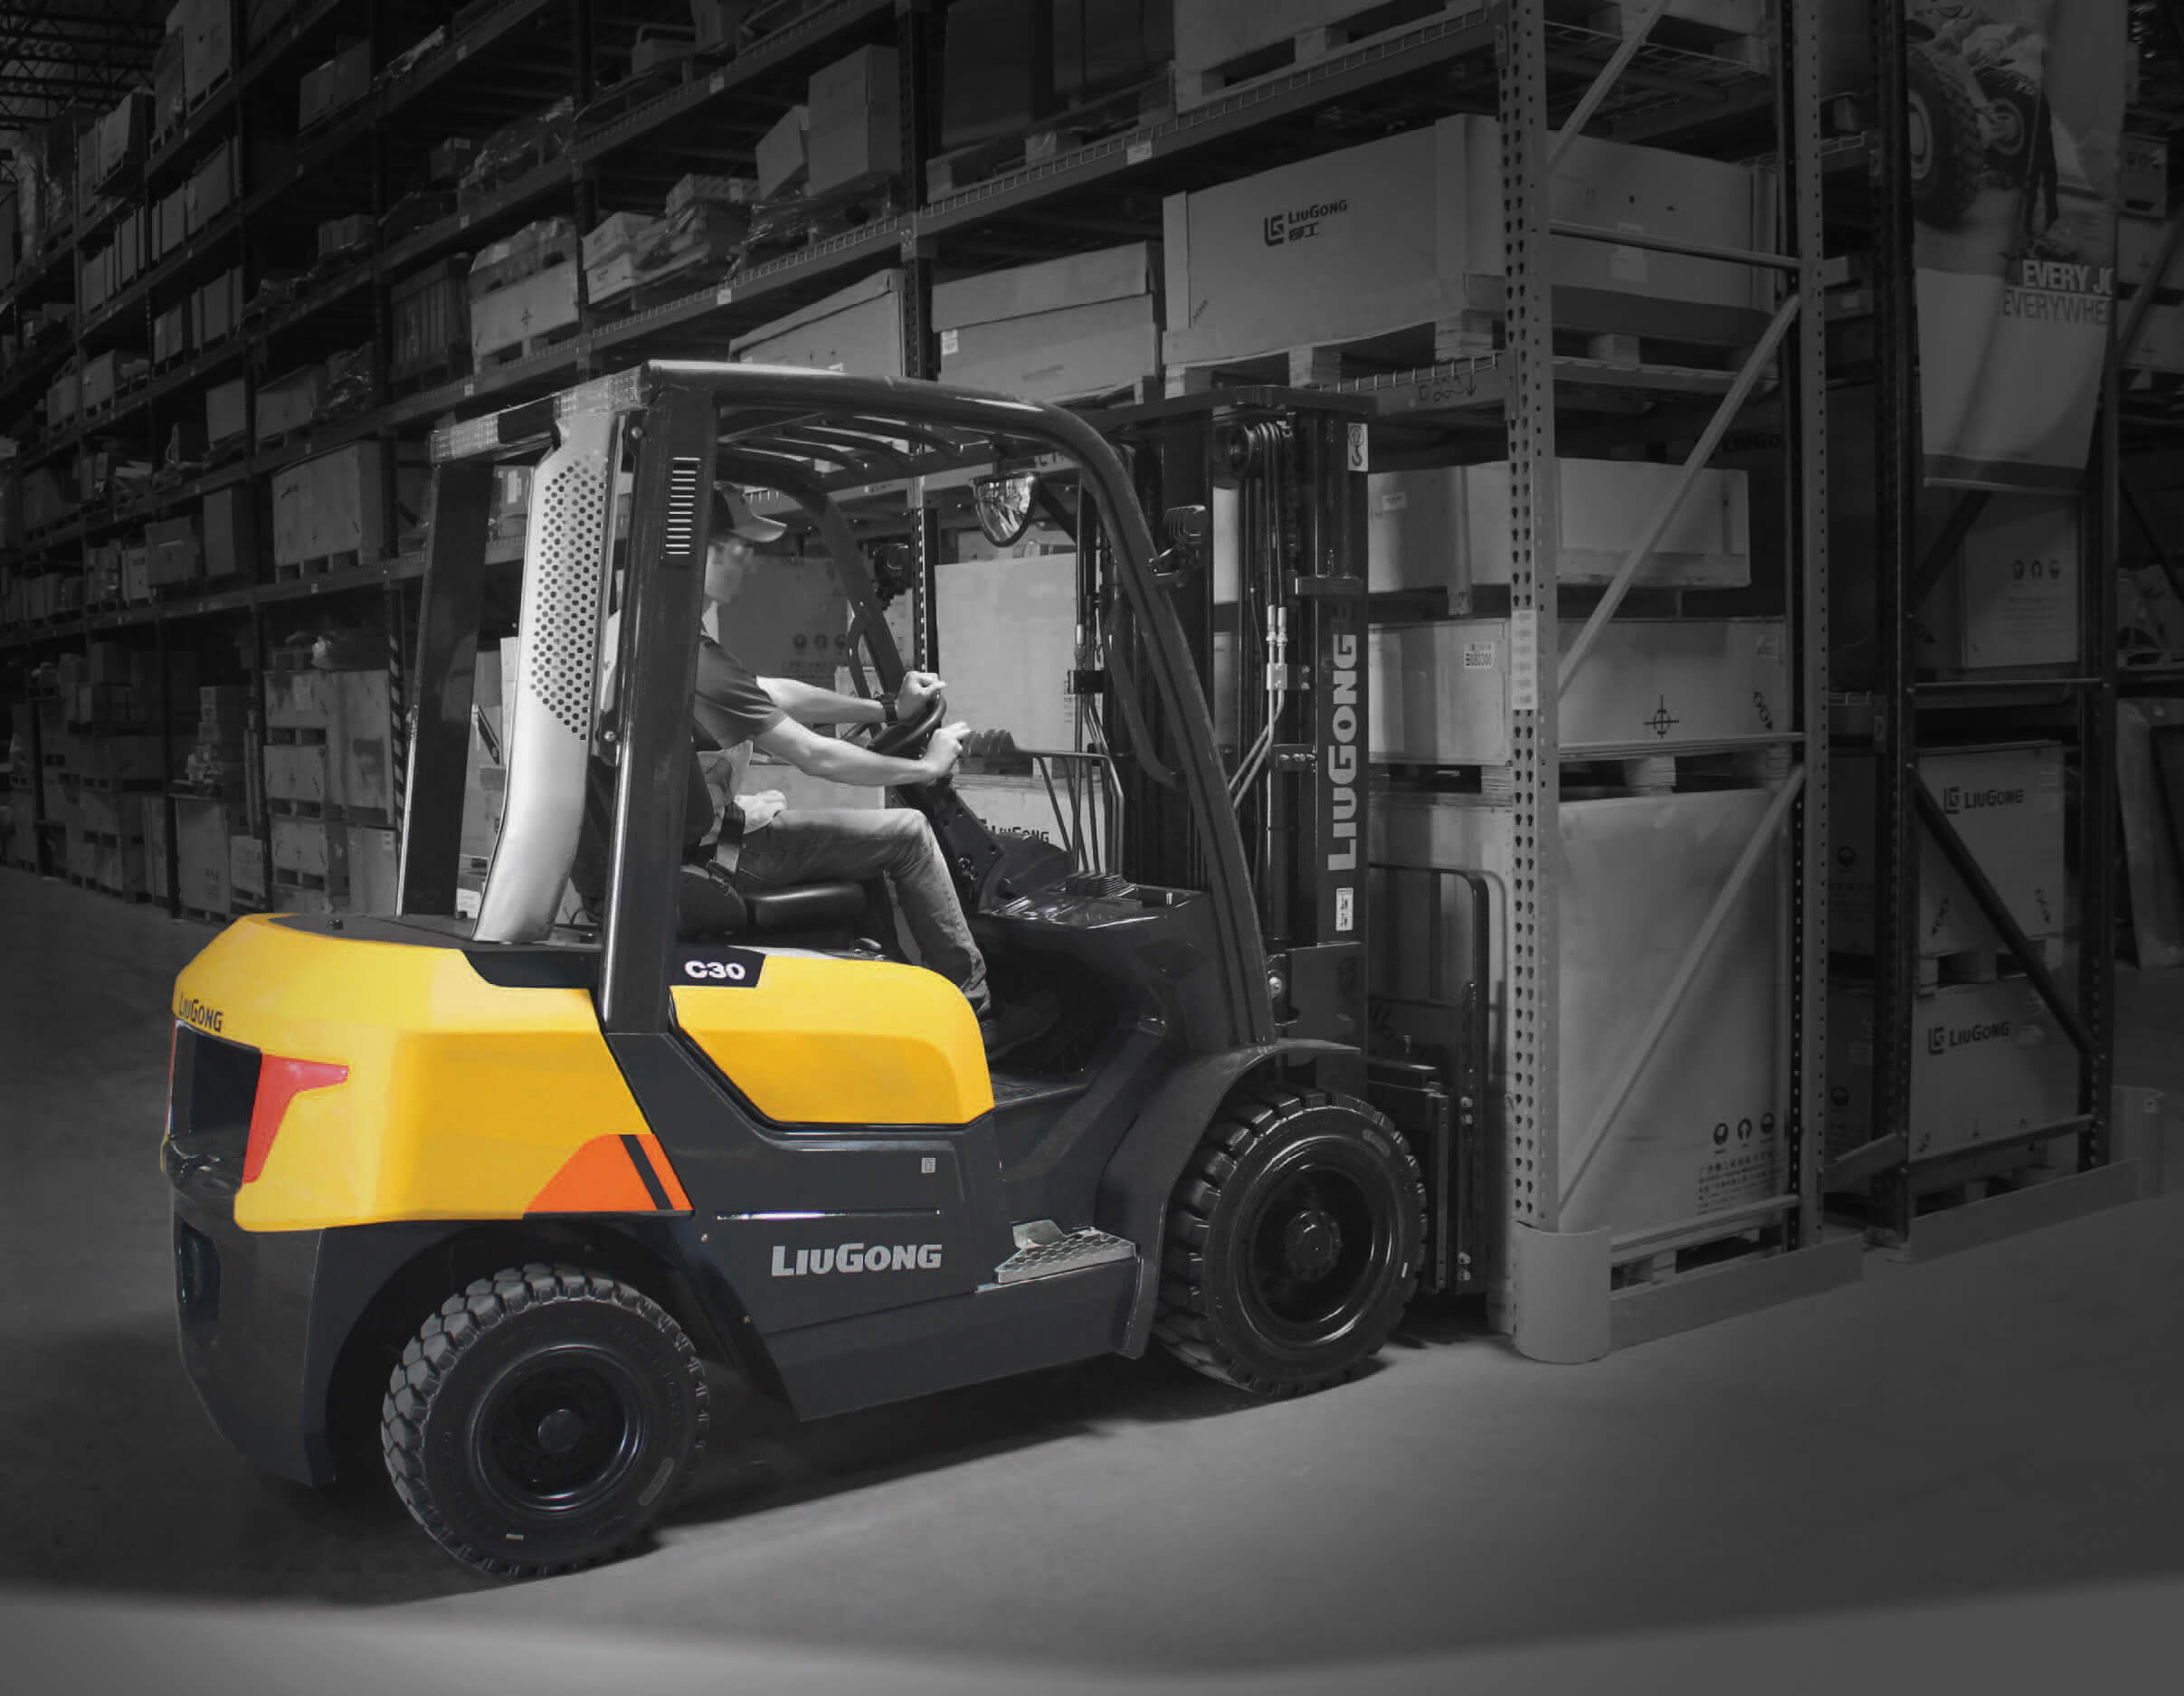 LiuGong forklift in warehouse lifing boxes on pallet out of racking